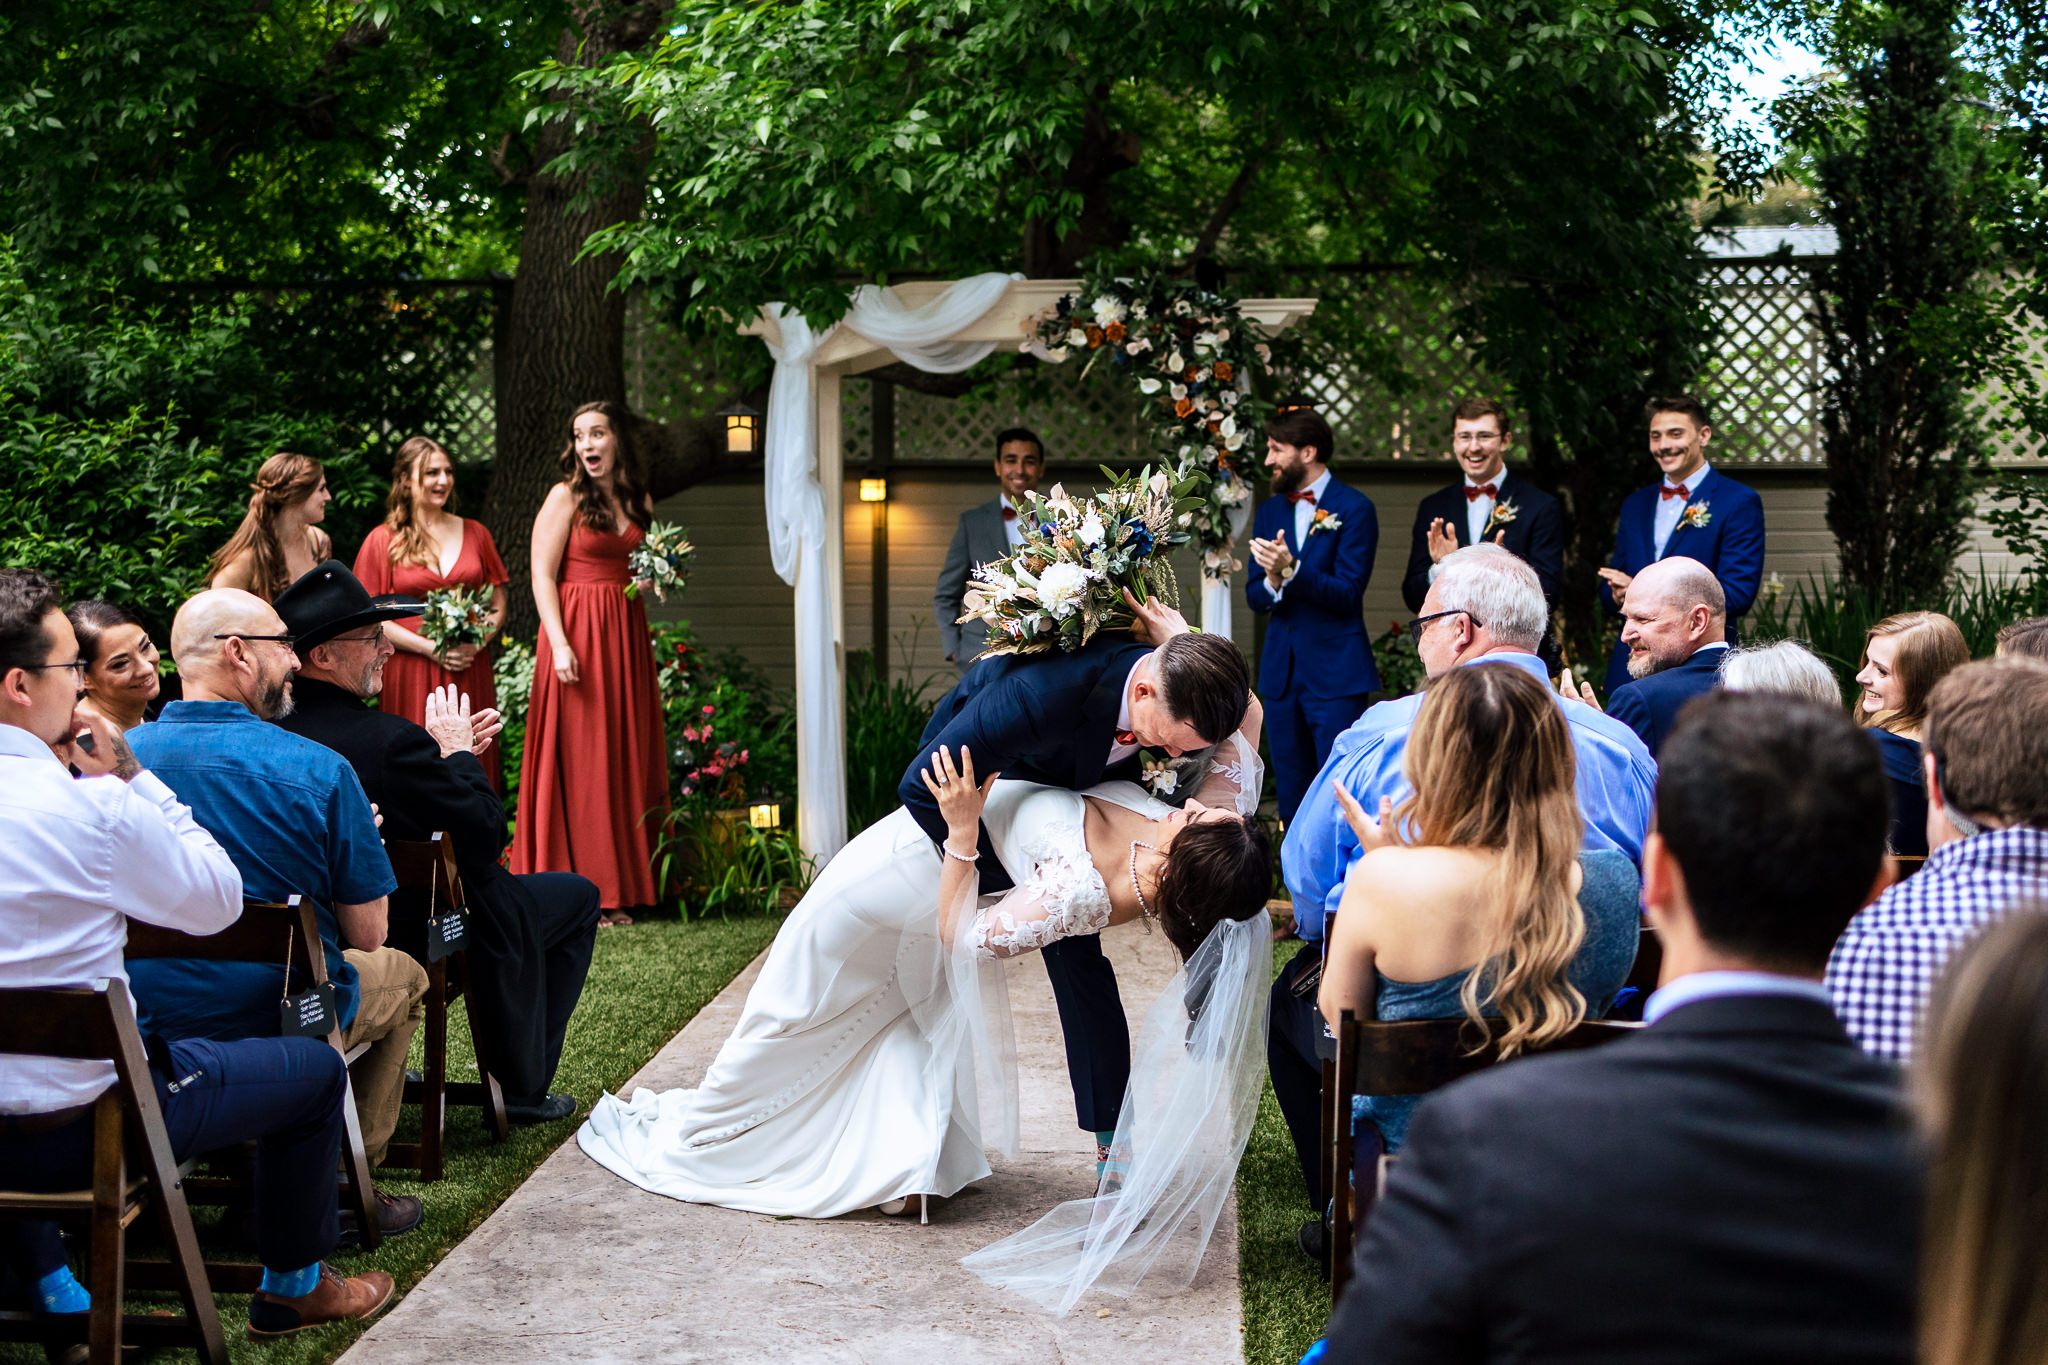 Groom dipping the Bride in the aisle to give her a kiss while walking back up the aisle after their wedding ceremony for Haley & Gytenis' Summer Wedding at The McCreery House by Colorado Wedding Photographer, Jennifer Garza.